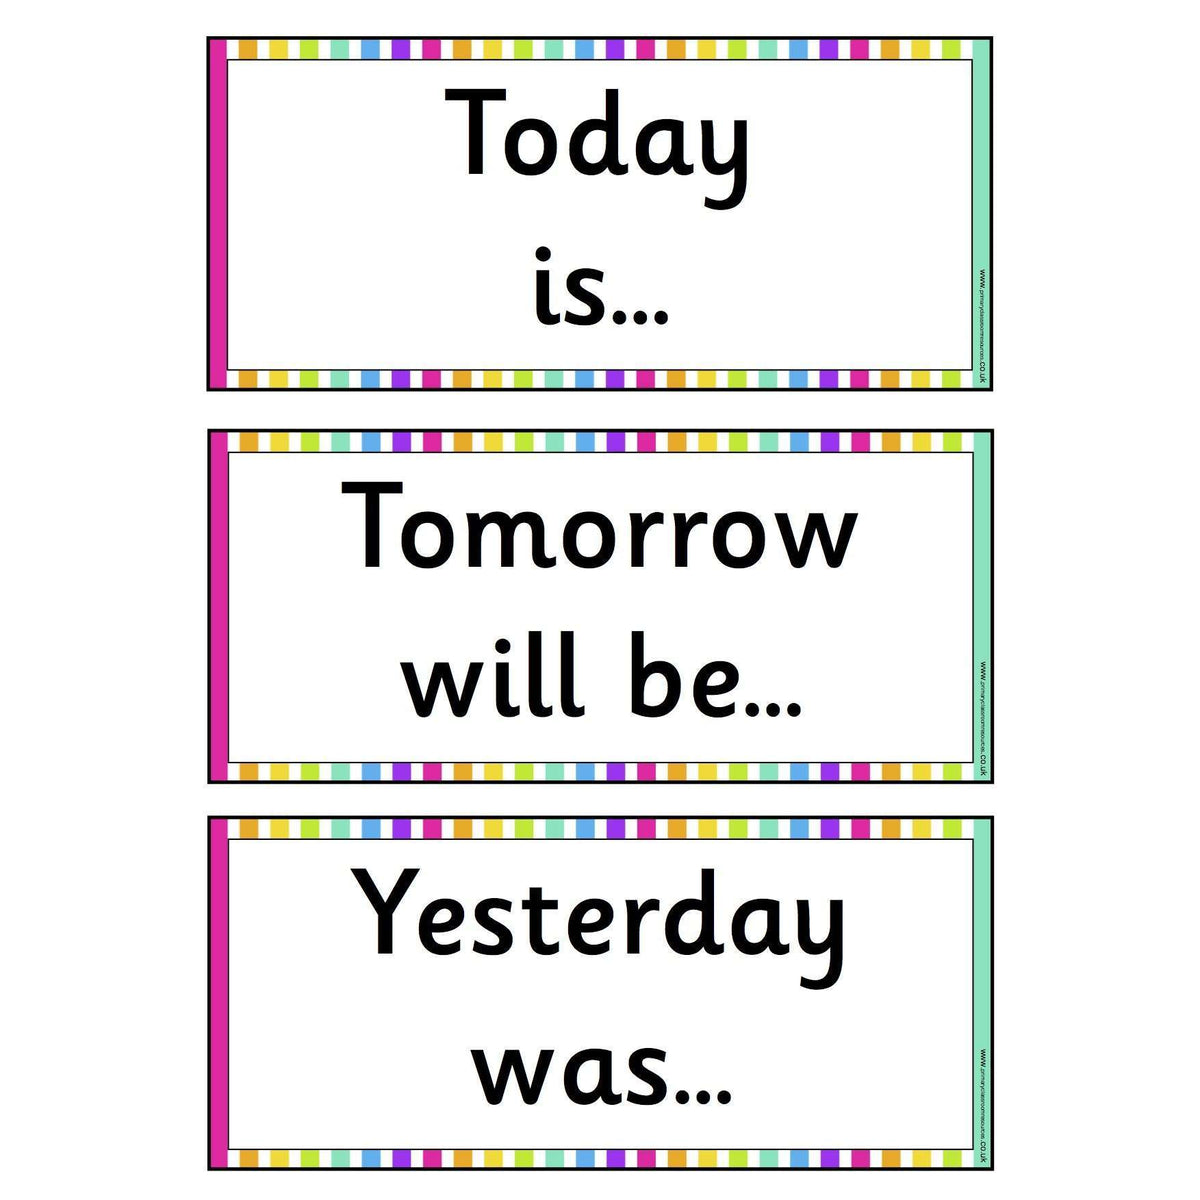 Rainbow Visual Timetable Today, Tomorrow and Yesterday plus Days of